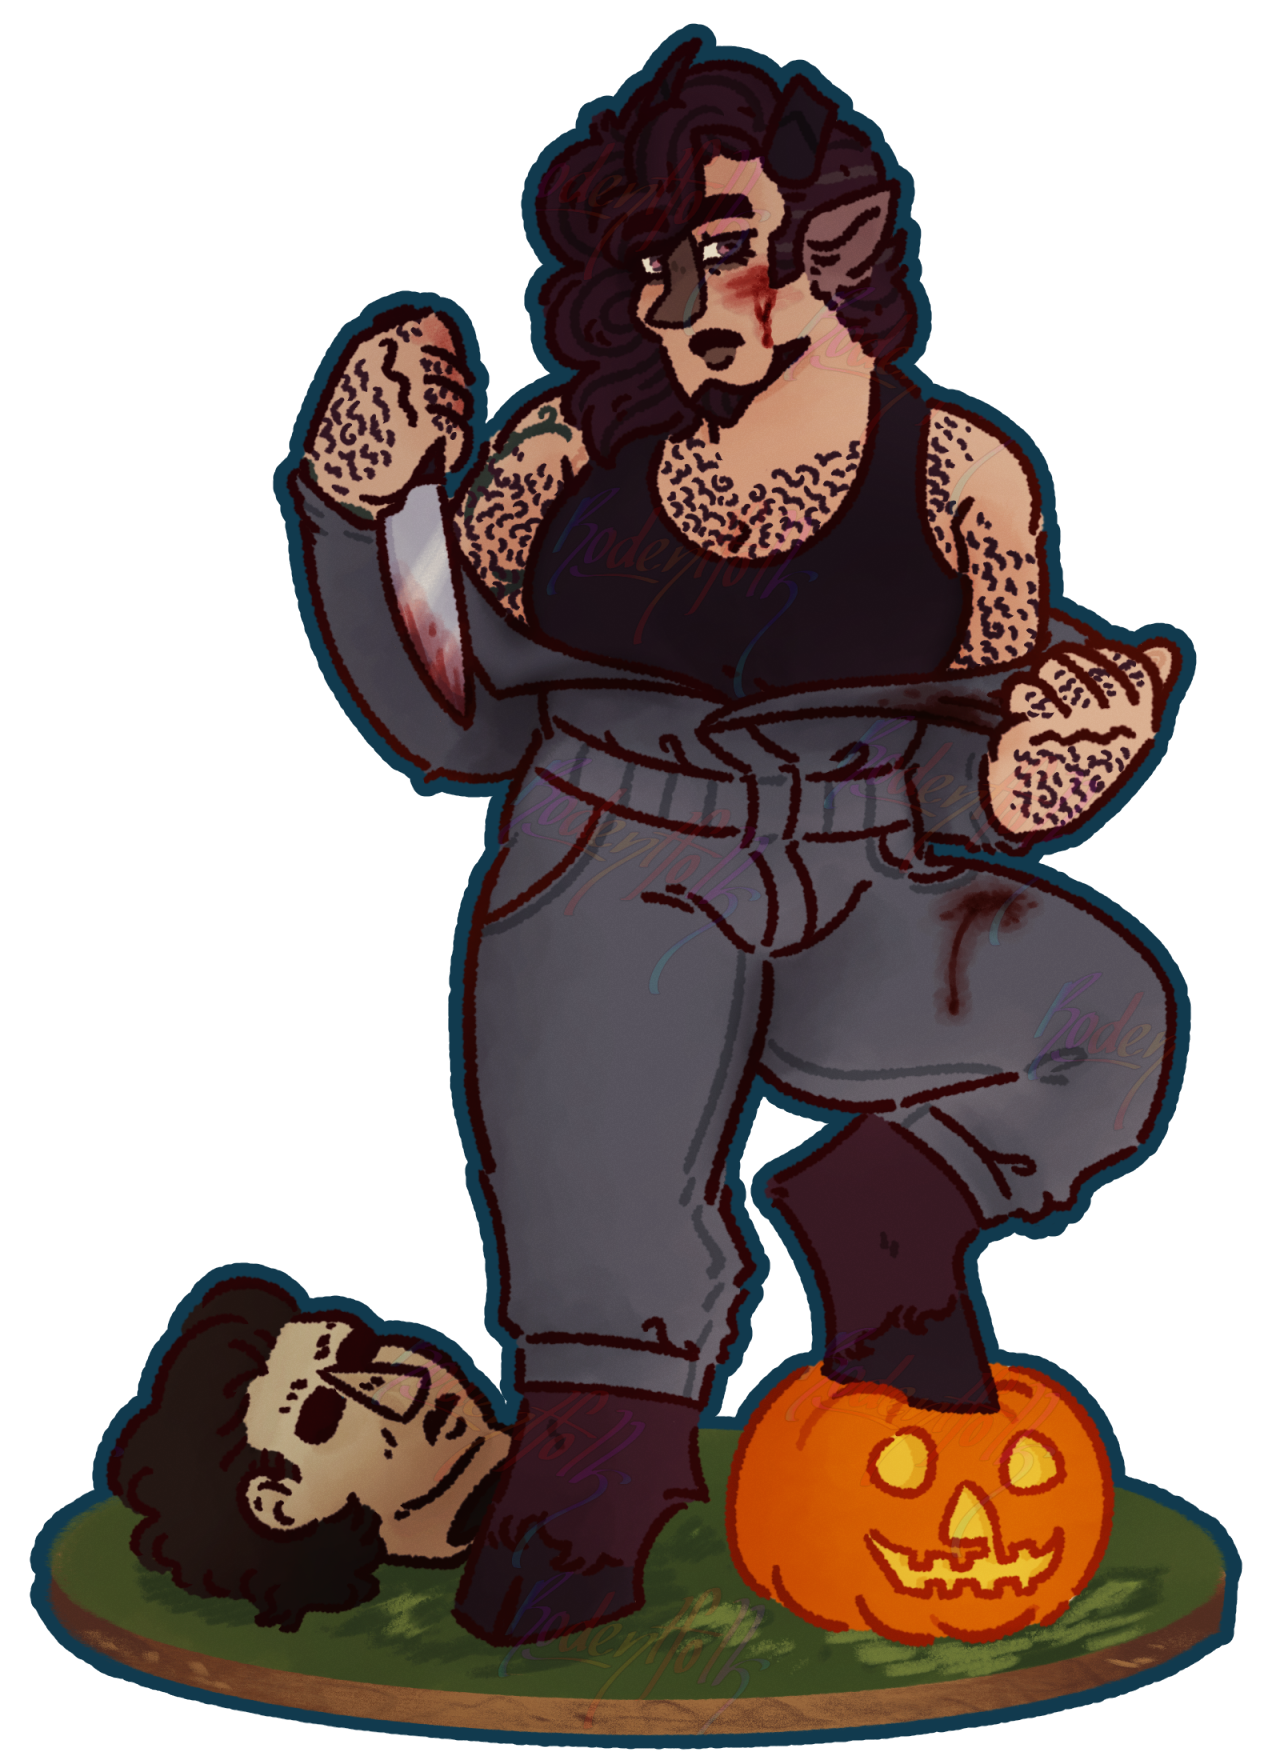 It is an illustration of Nik's character, Monty. He is a faun with dark brown hair, black horns, black hooves, and light brown fur on his legs that turns dark brown. He is dressed similar to Micheal Myers from the horror franchise, Halloween. Wearing dark grey mechanic overalls that are unzipped to expose a black tank top beneath. He is holding a knife with blood dripping down it. Blood is smeared on one of his cheeks, and on the overalls. He is standing with one hoof on a pumpkin, giving the camera an emotionless look. On the grass behind him is Micheal Myers' mask.